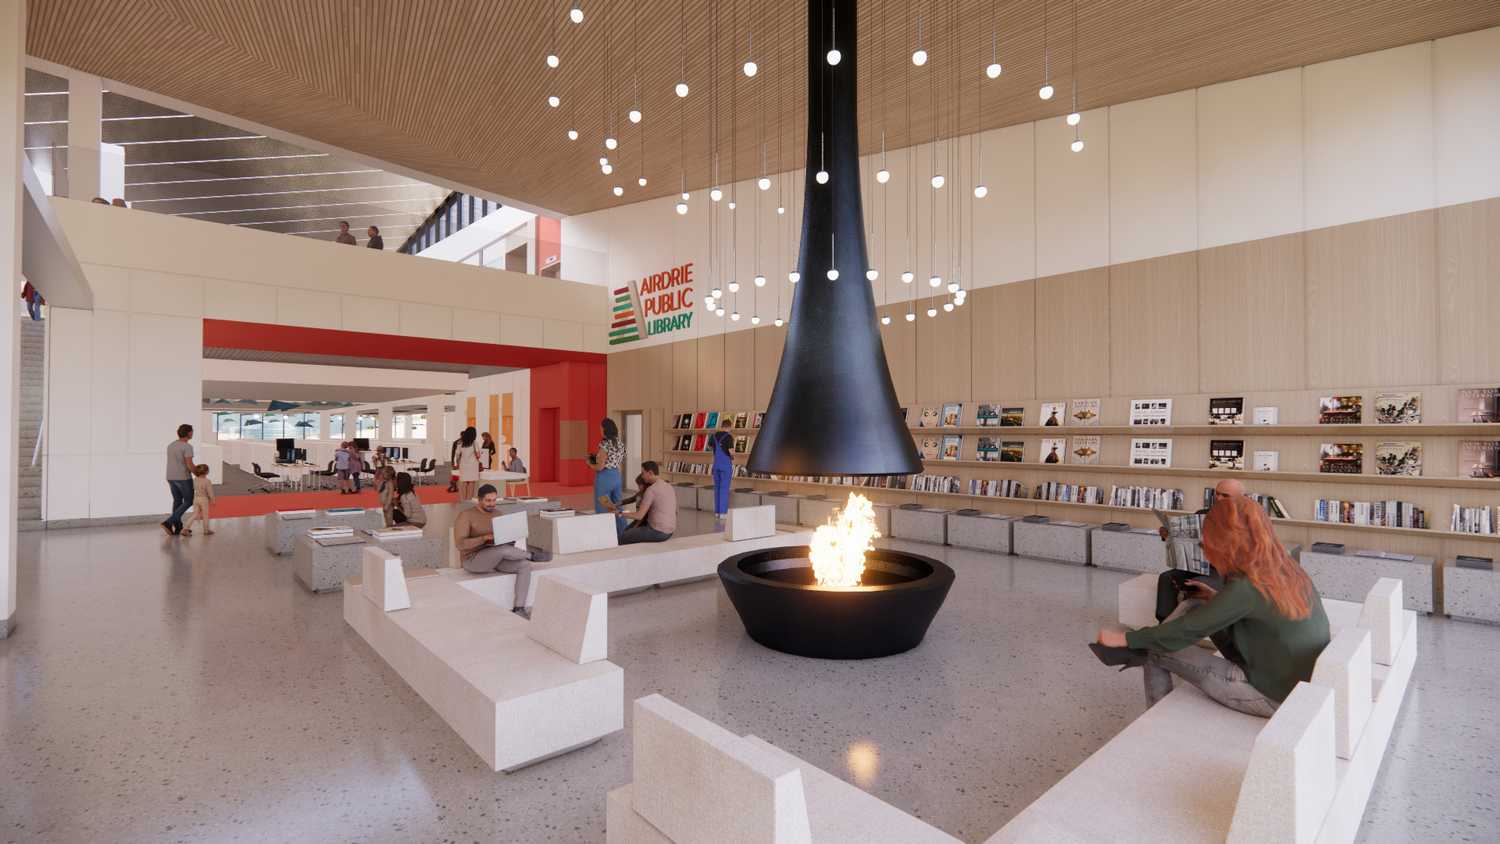 Building lobby, people sitting next to fireplace in foreground, bookshelves and library entrance in background.